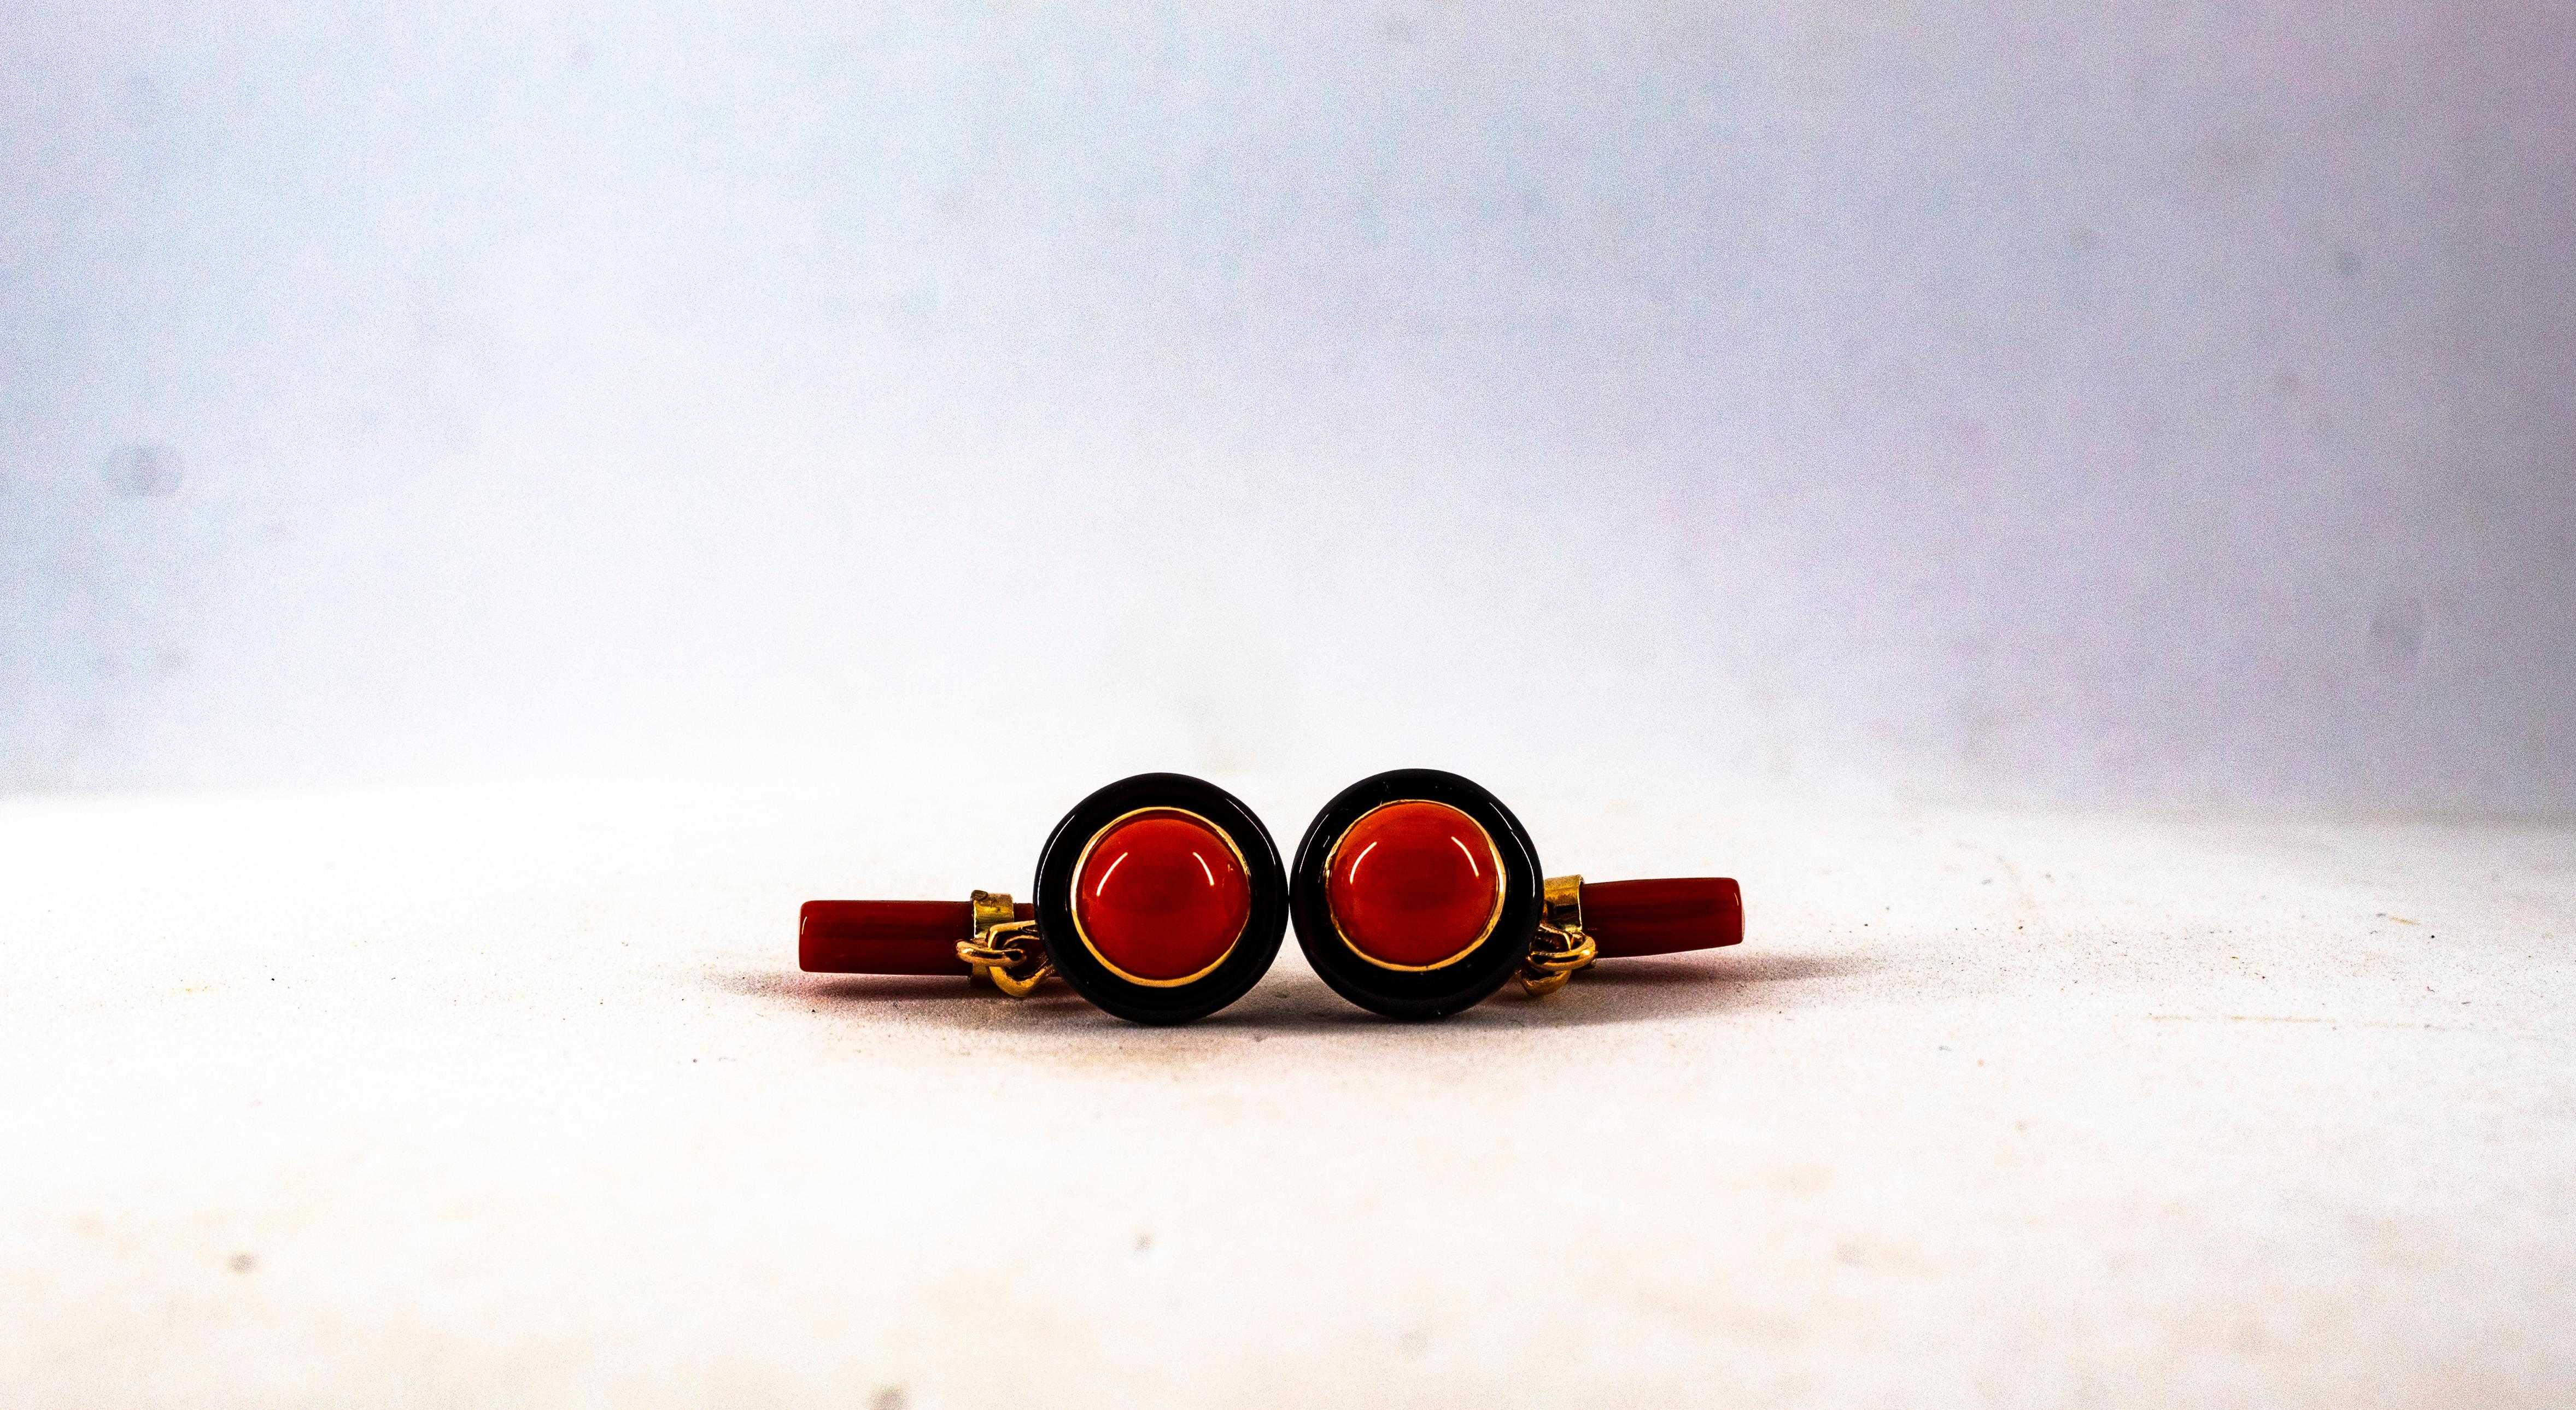 For any problems related to some materials contained in the items that do not allow shipping and require specific documents that require a particular period, please contact the seller with a private message to solve the problem.

These Cufflinks are